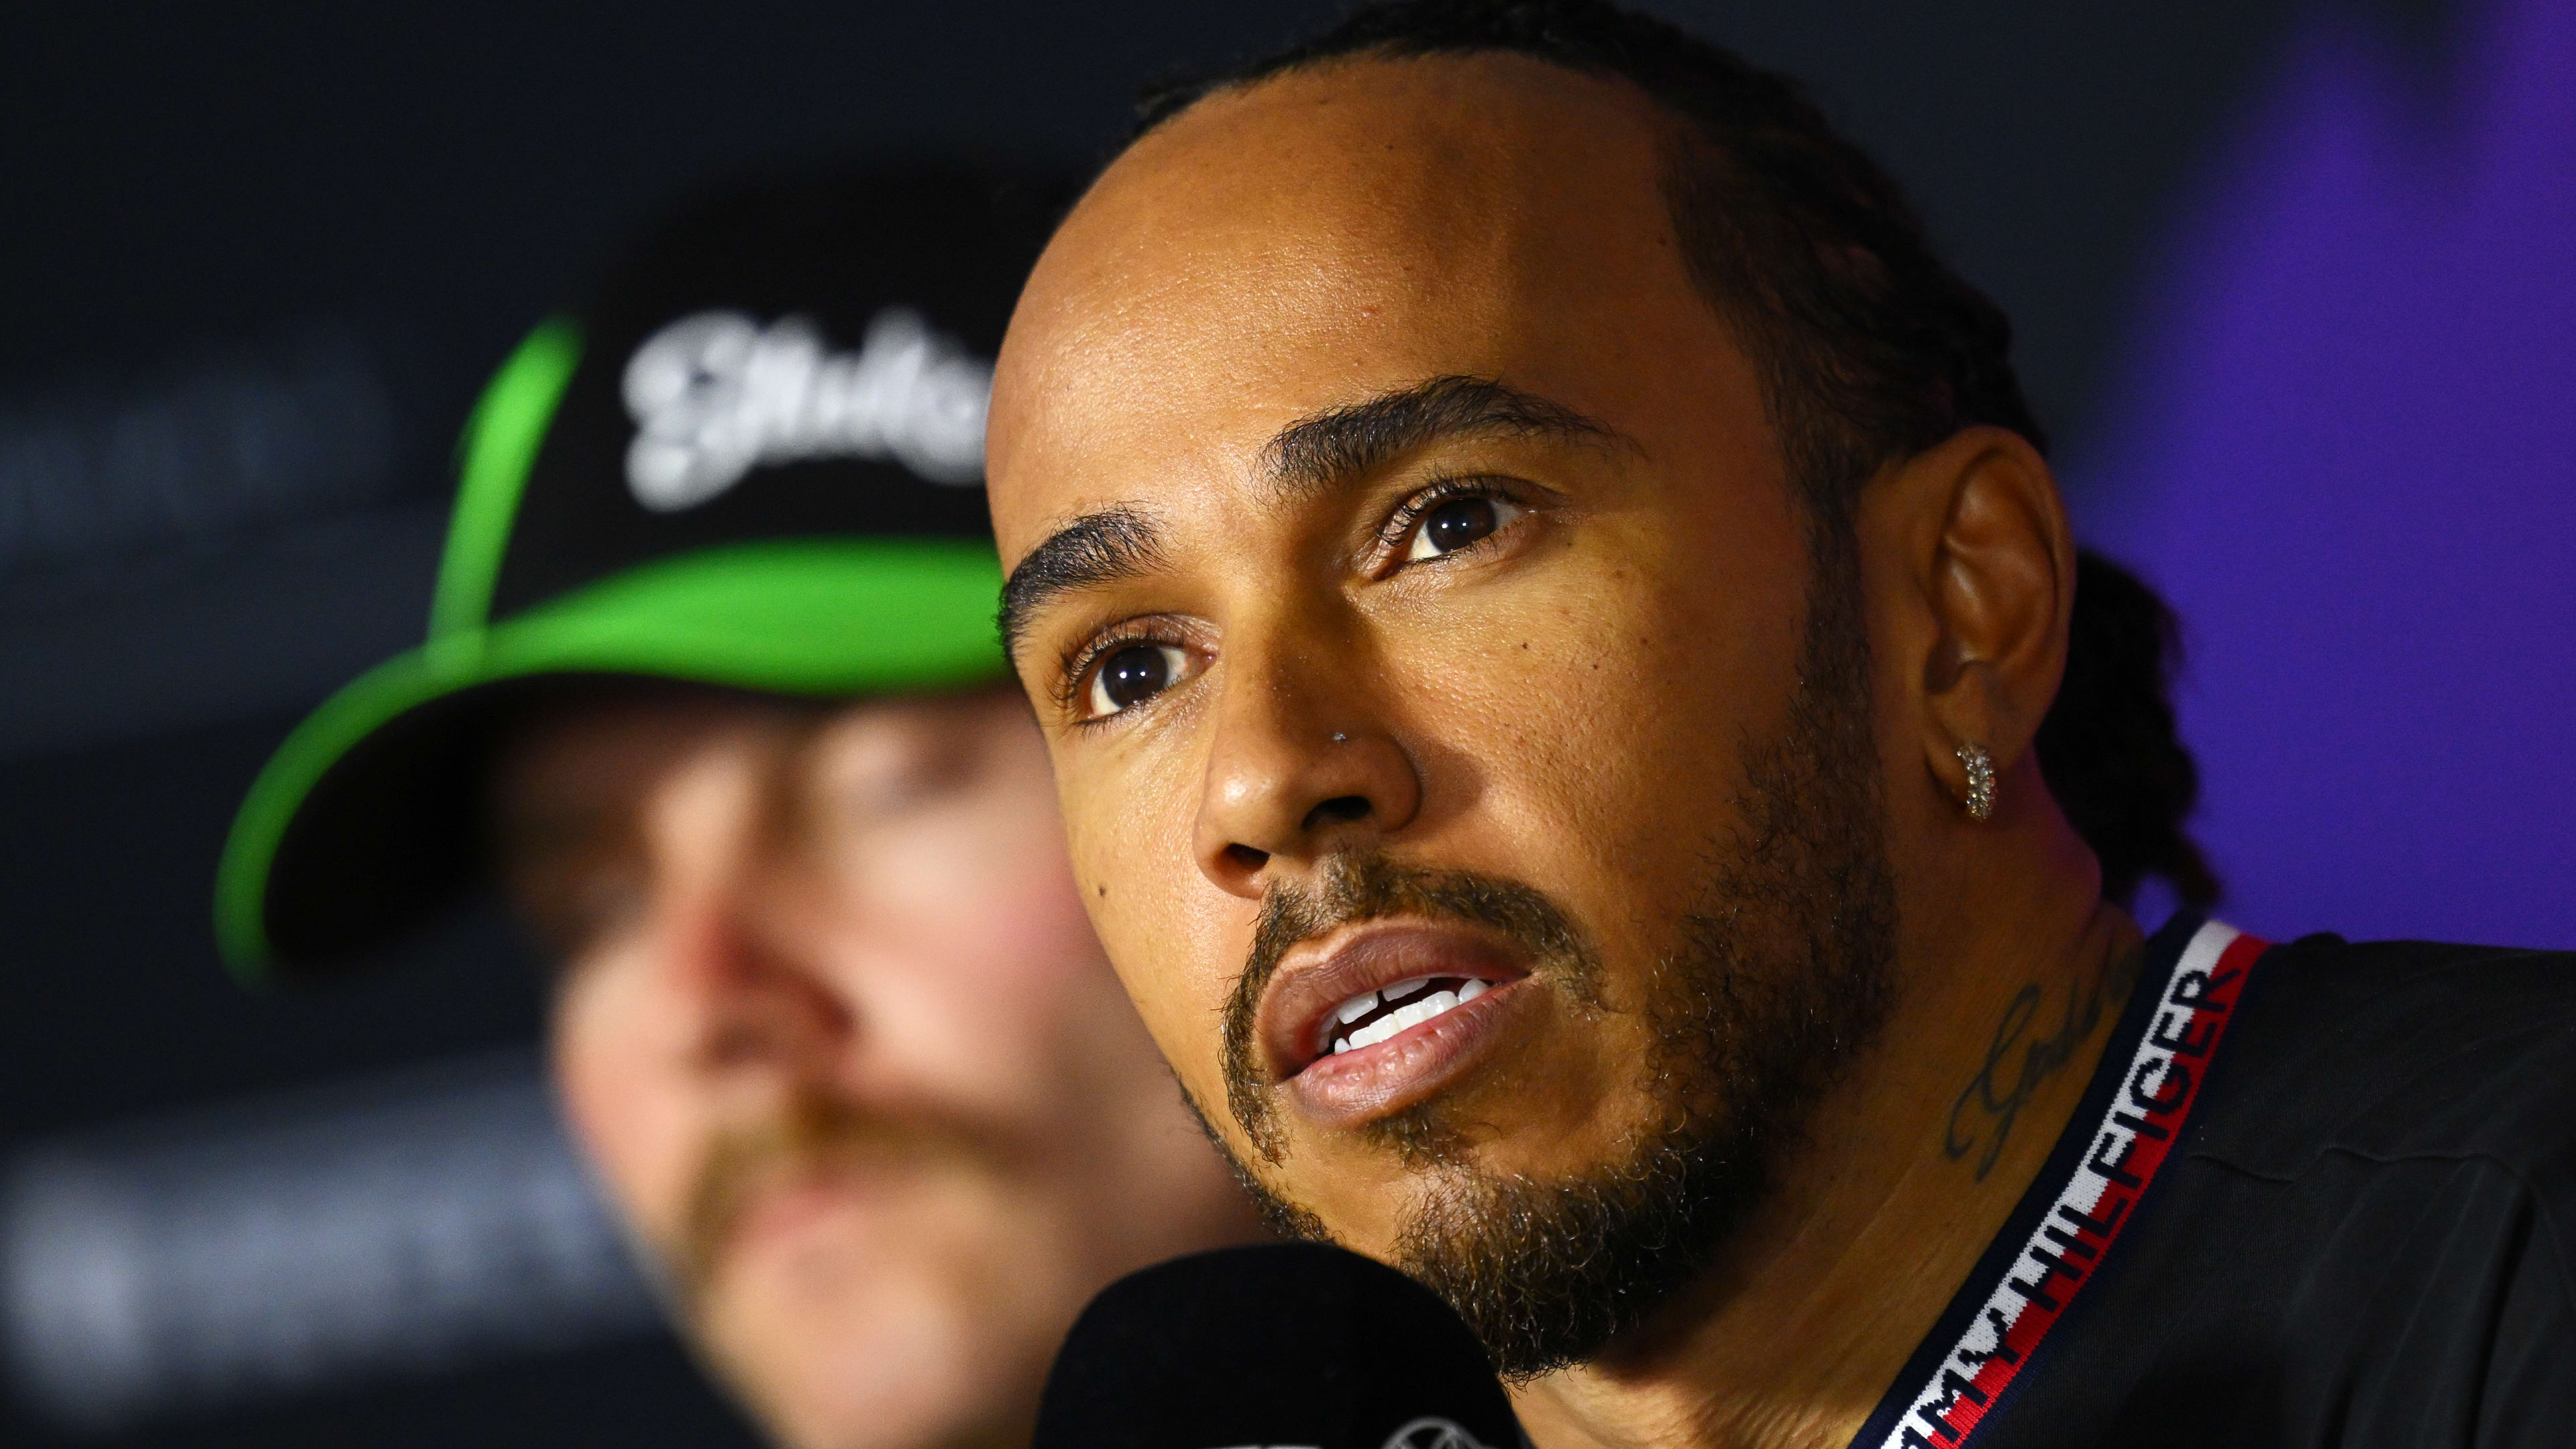 BAHRAIN, BAHRAIN - FEBRUARY 23: Lewis Hamilton of Great Britain and Mercedes attends the Drivers